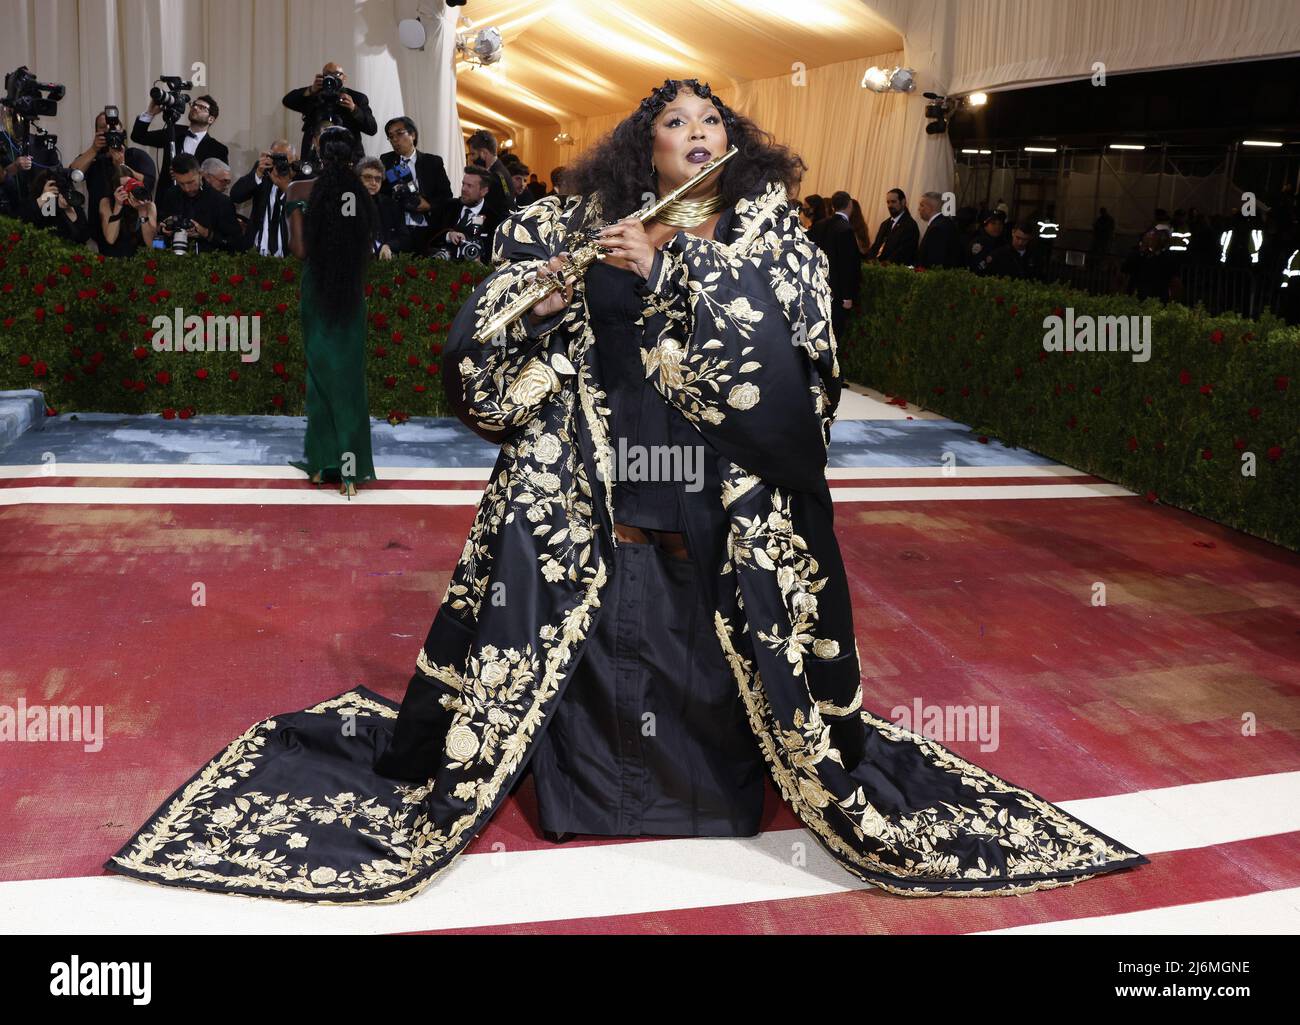 New York, United States. 03rd May, 2022. Lizzo arrives on the red carpet for The Met Gala at The Metropolitan Museum of Art celebrating the Costume Institute opening of 'In America: An Anthology of Fashion' in New York City on Monday, May 2, 2022. Photo by John Angelillo/UPI Credit: UPI/Alamy Live News Stock Photo